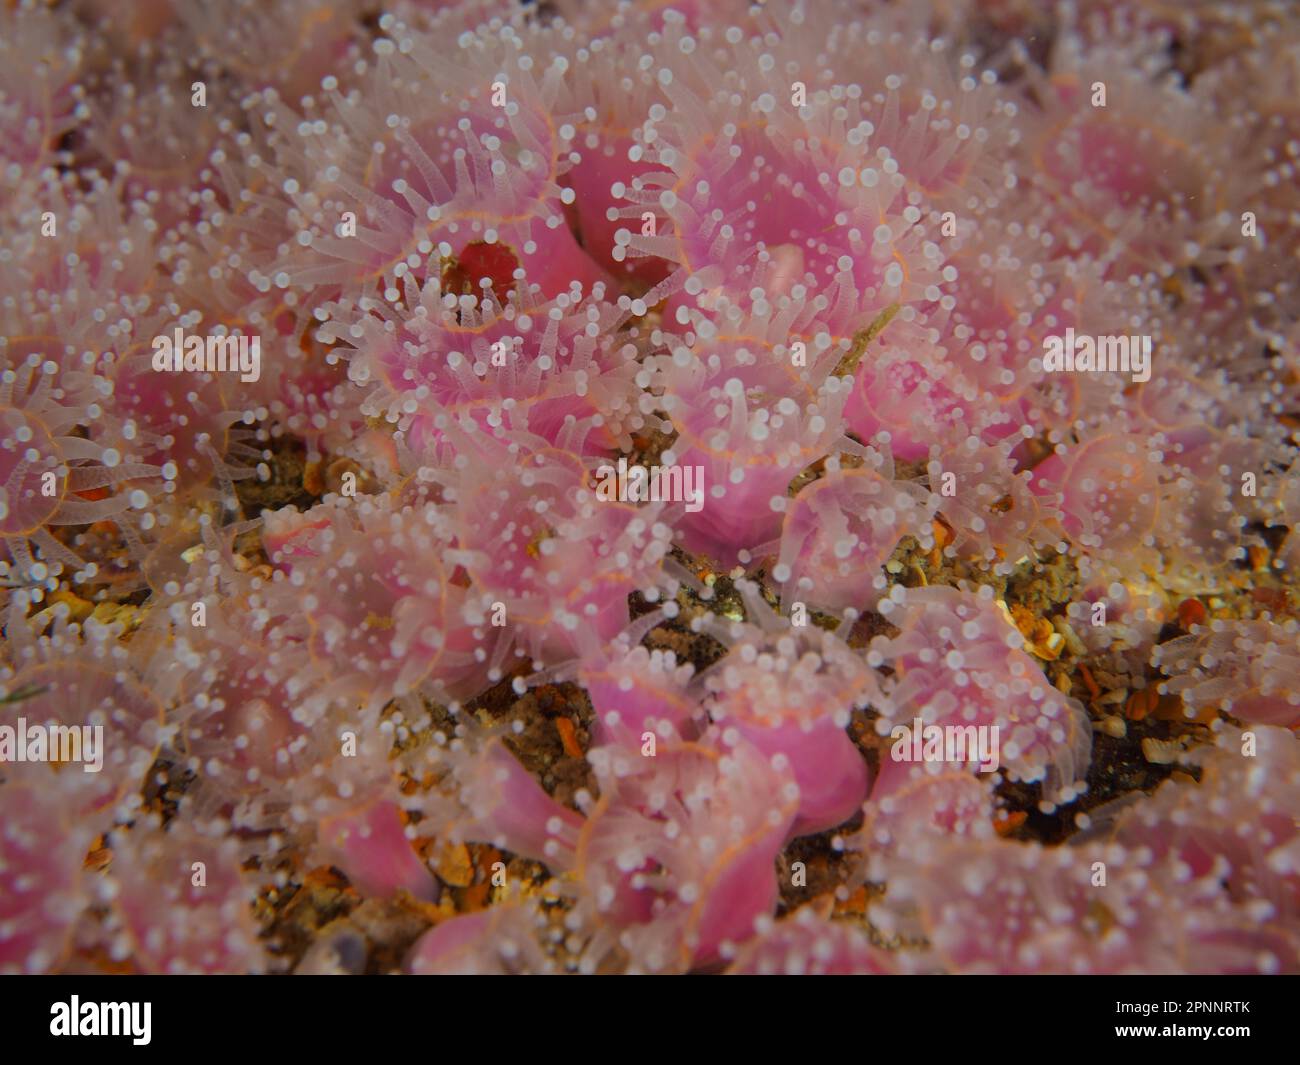 Strawberry anemone (Corynactis annulata), sea anemone, False Bay, Cape of Good Hope, Cape Town, South Africa Stock Photo